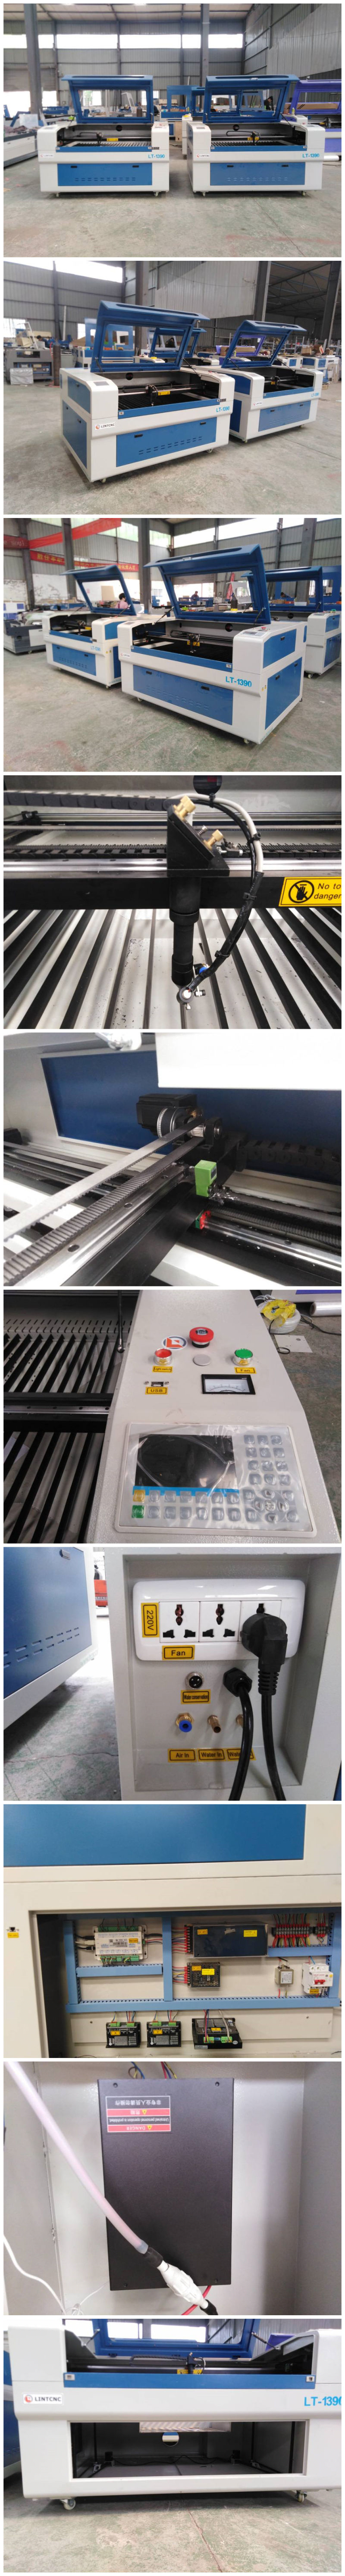 130W CO2 Wood CNC Laser Cutting Machine, 3D Laser Cutter Machine for Plastic, Leather, MDF, Acrylic